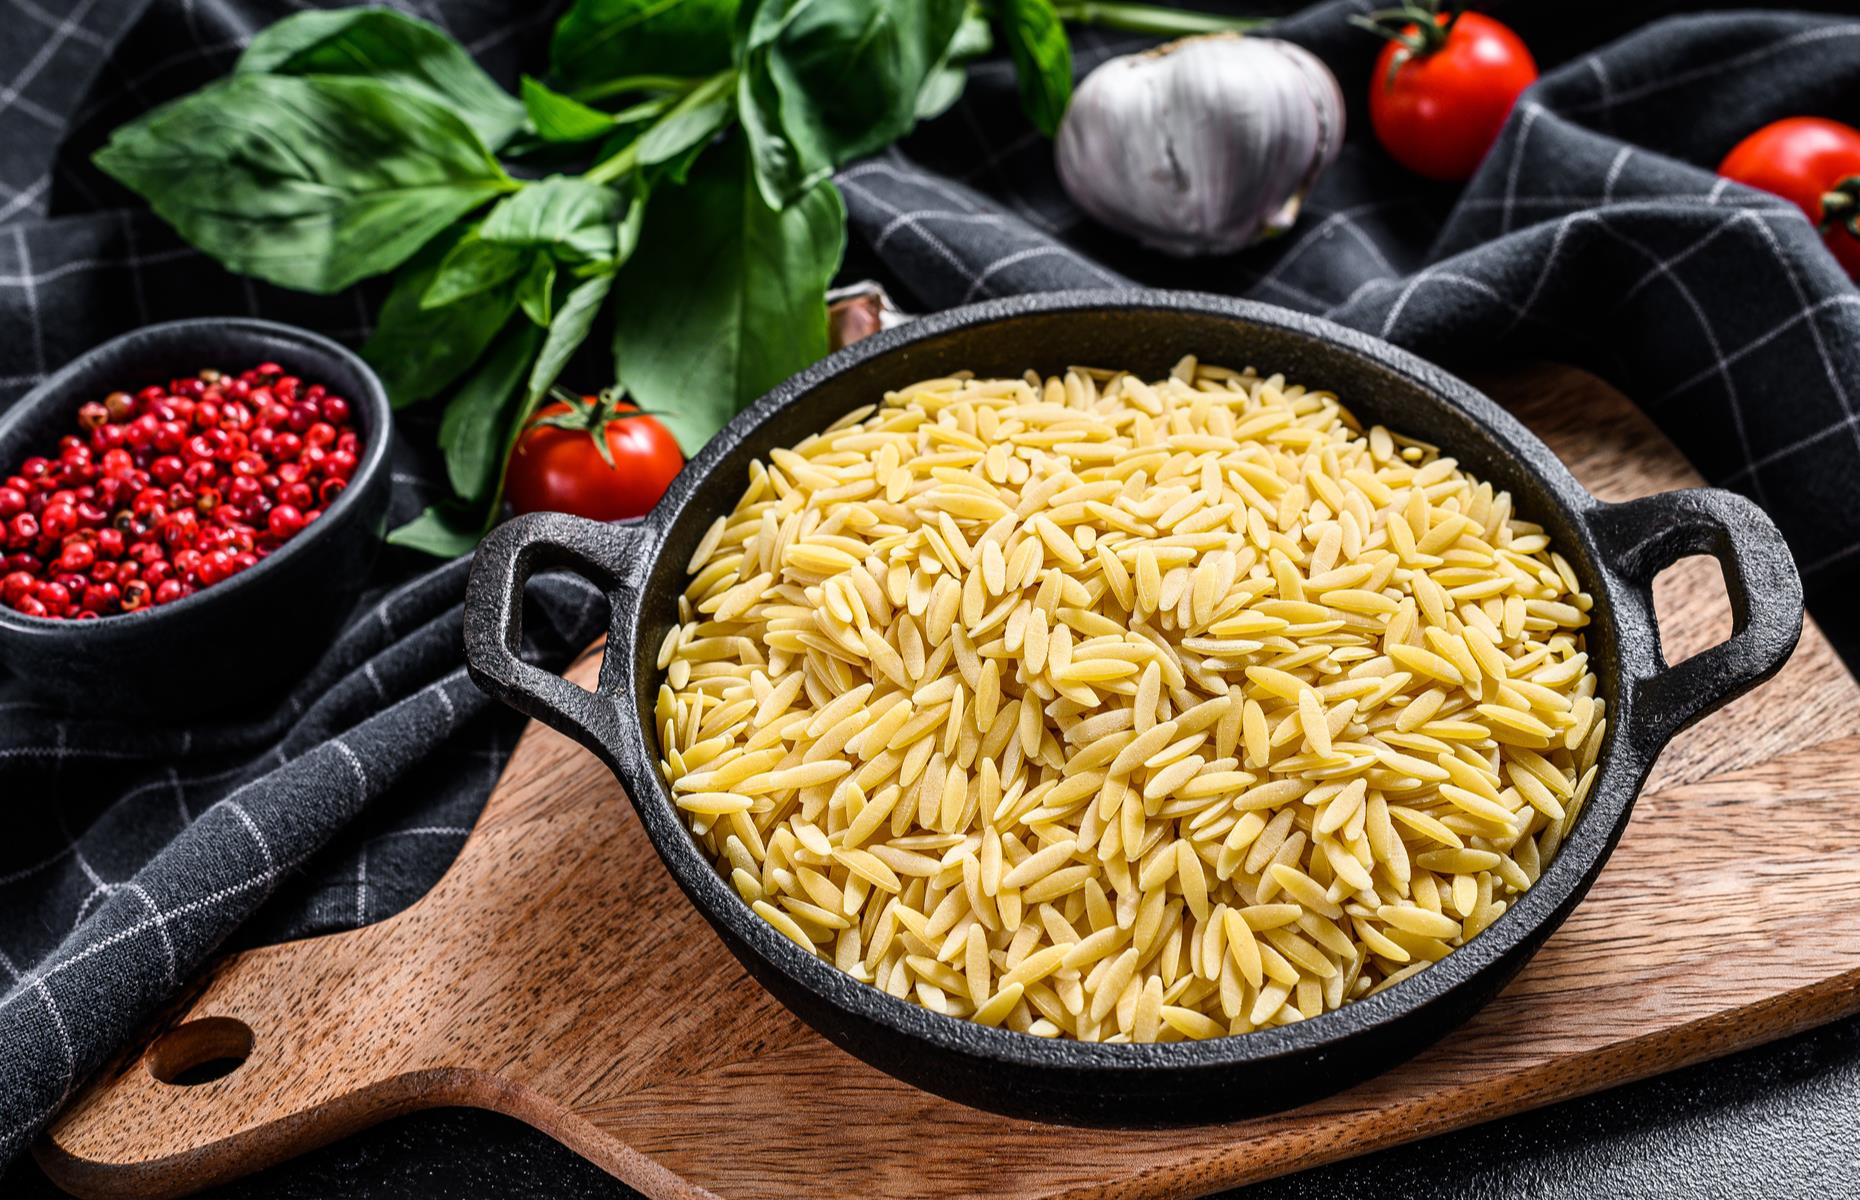 <p>For Nigella, orzo, a small rice-sized pasta shape, is a 'non-negotiable staple.' She says it's extremely versatile and works wonders in a variety of recipes – from salads to one-pot pasta dishes – or swapped in as a side in place of potatoes or rice.</p>